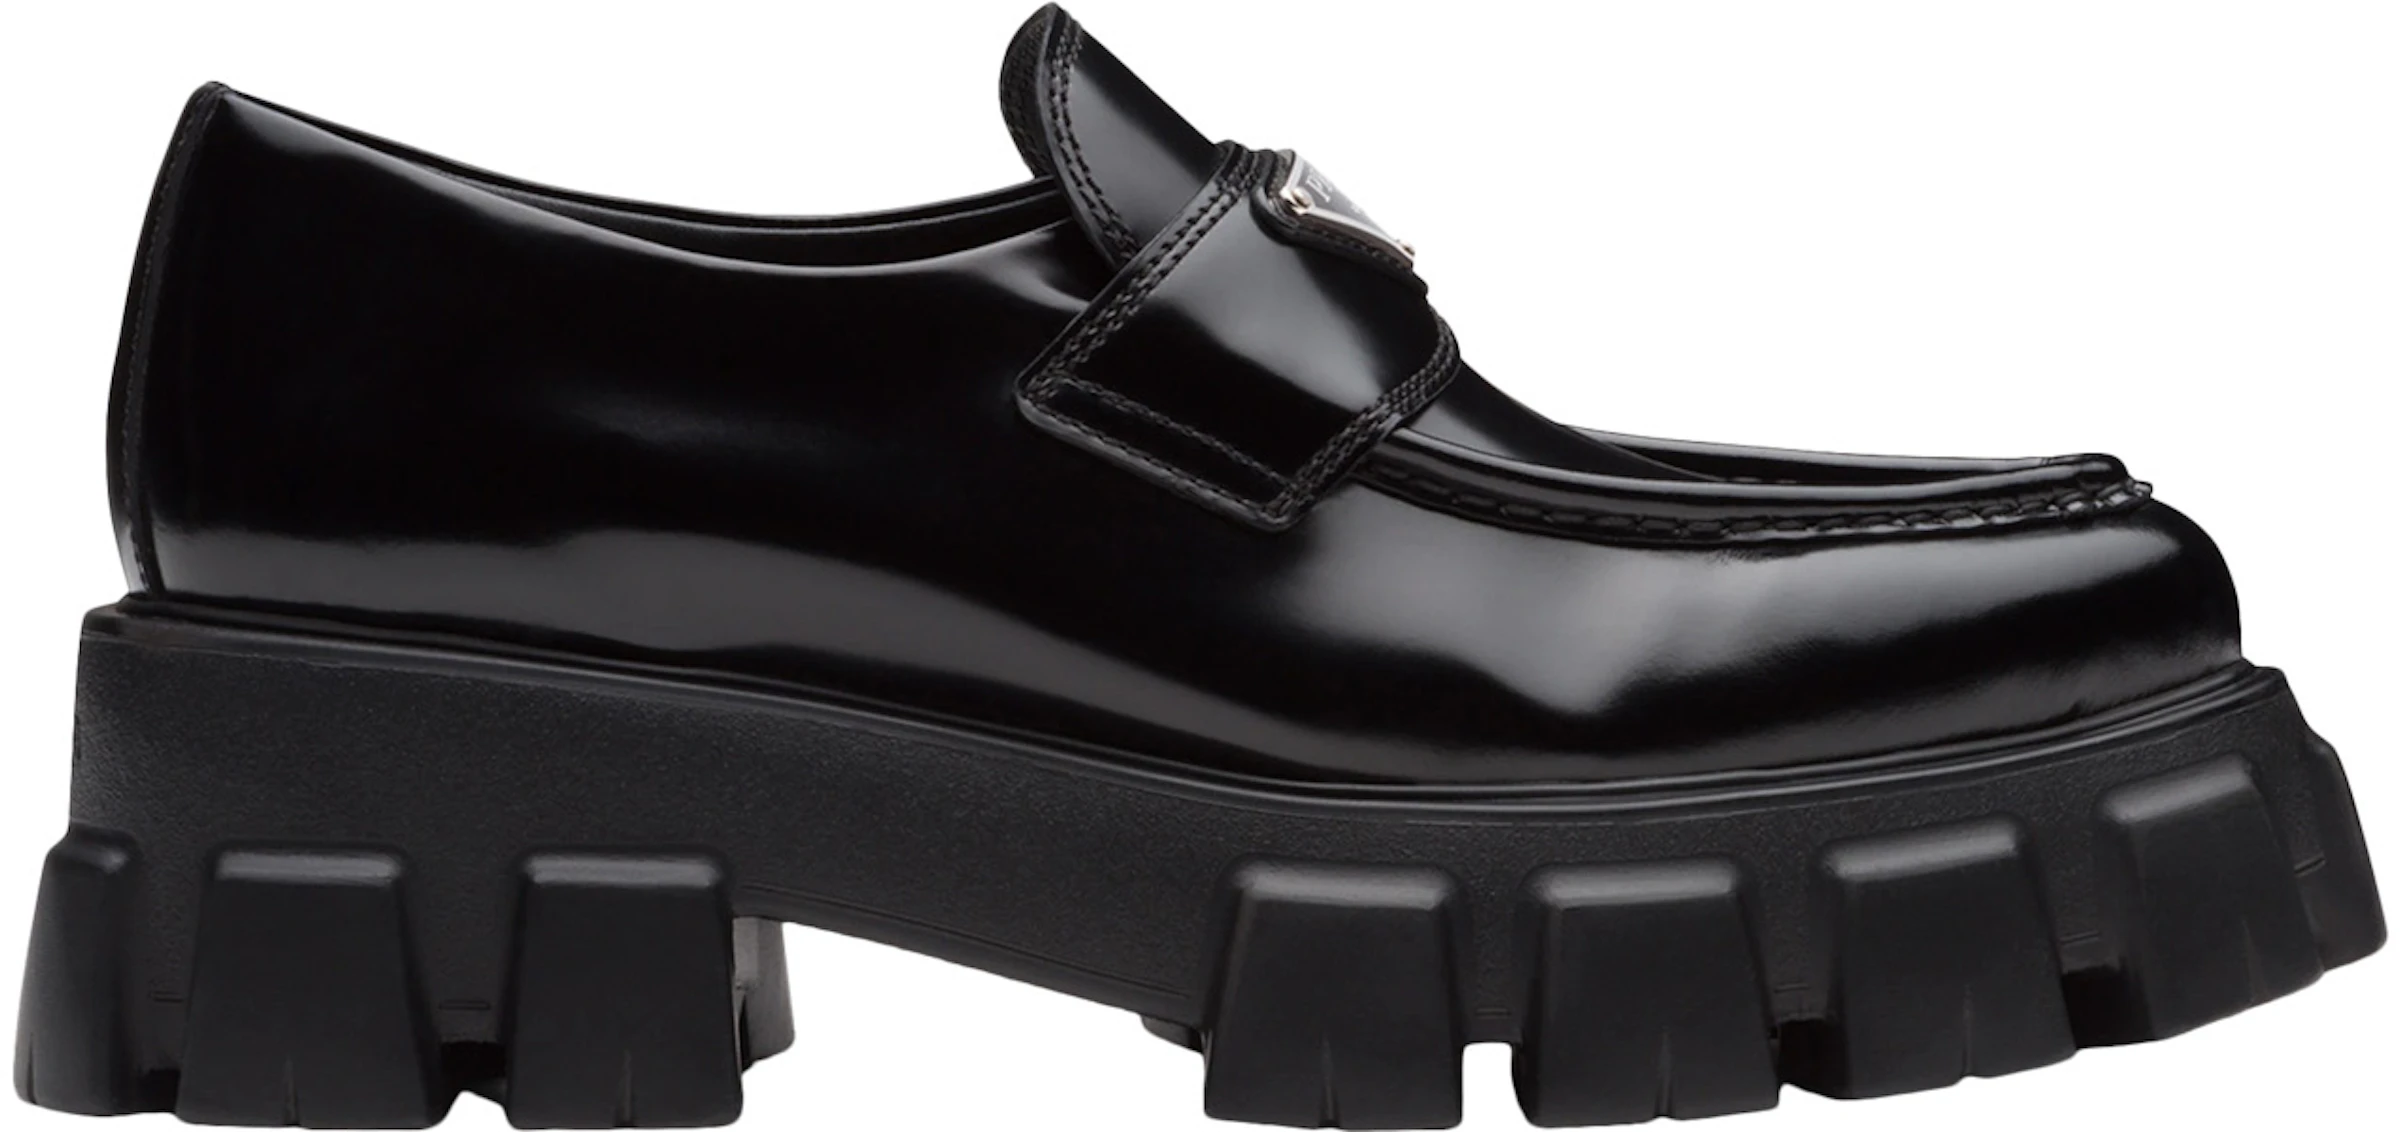 Buy Prada Loafers Shoes & New Sneakers - StockX